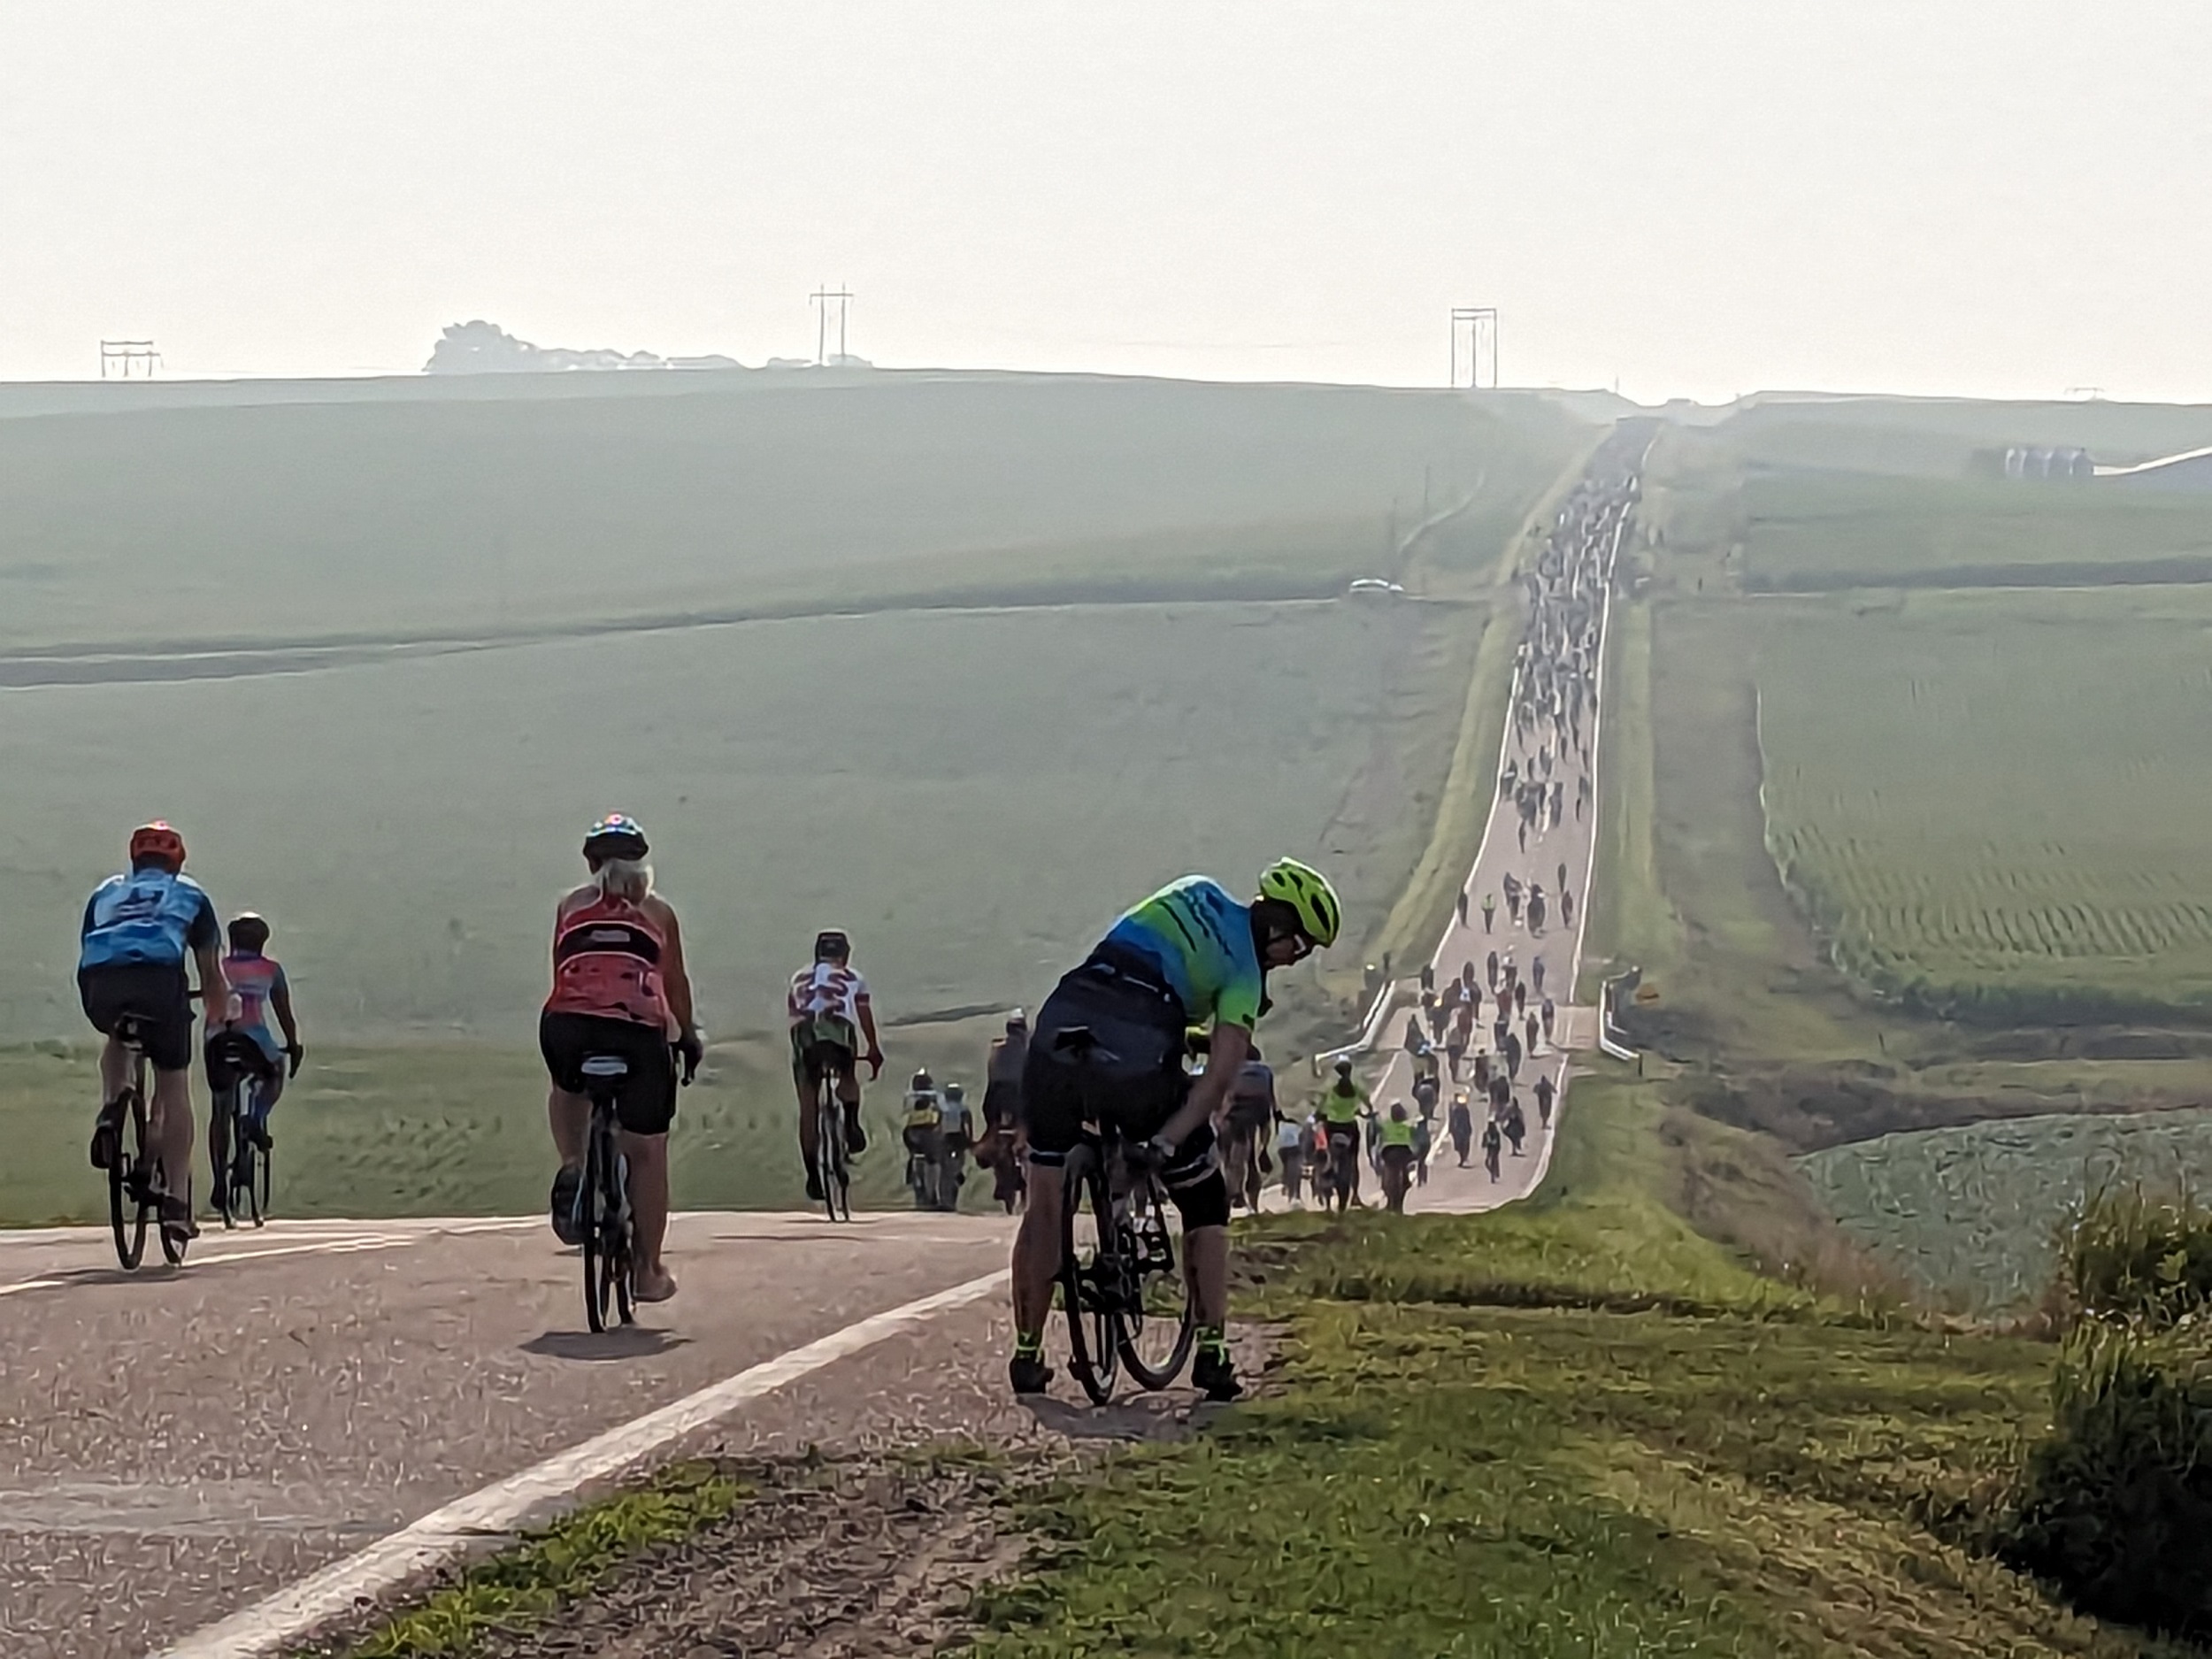 A large muber of cyclists going down then up a hill in the rural distance.